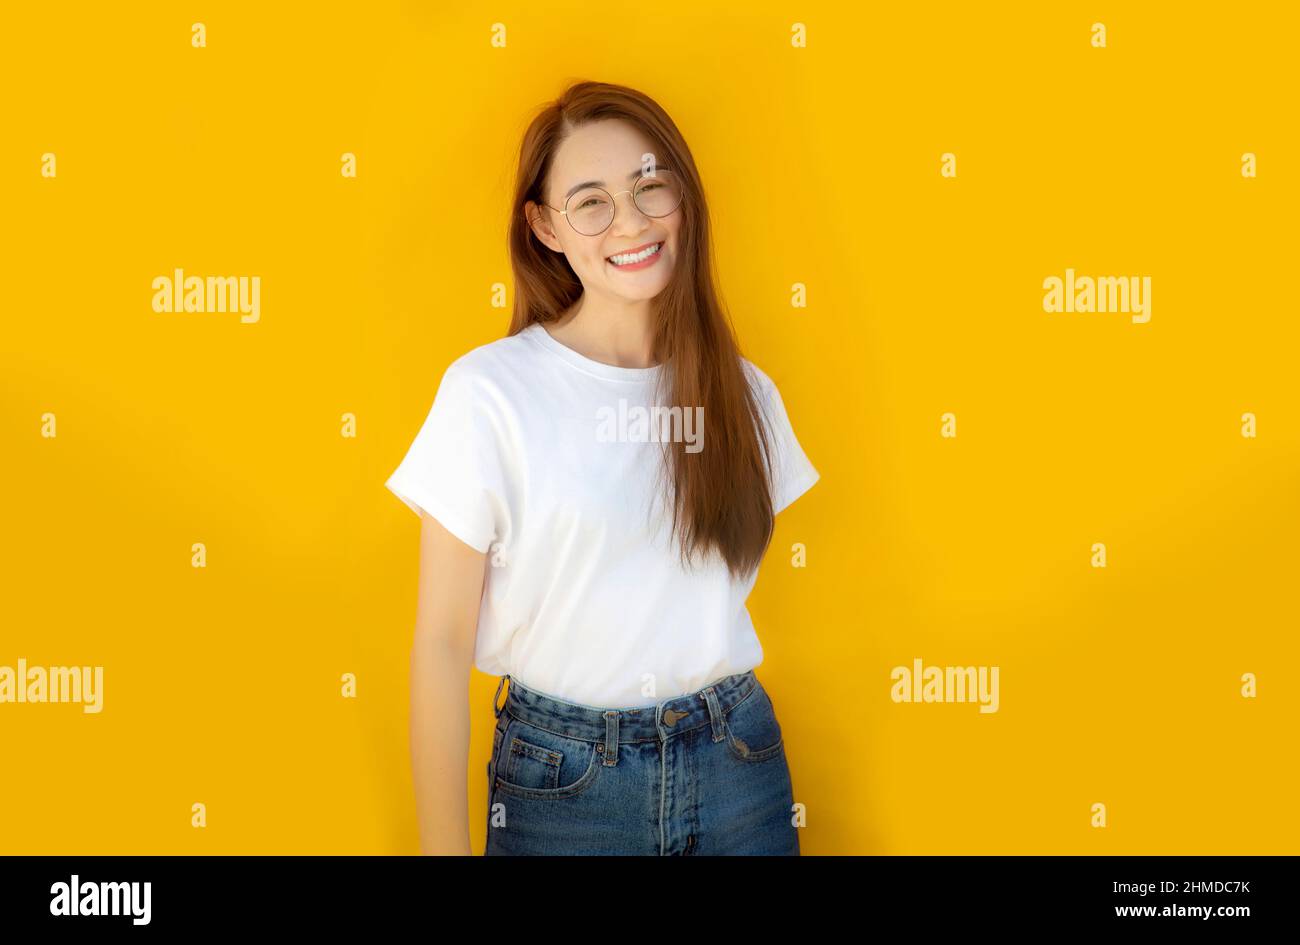 Portrait asian Woman against yellow Background.asian woman wearing glass, white shirt and blue jeans on yellow background for advertising banner Stock Photo